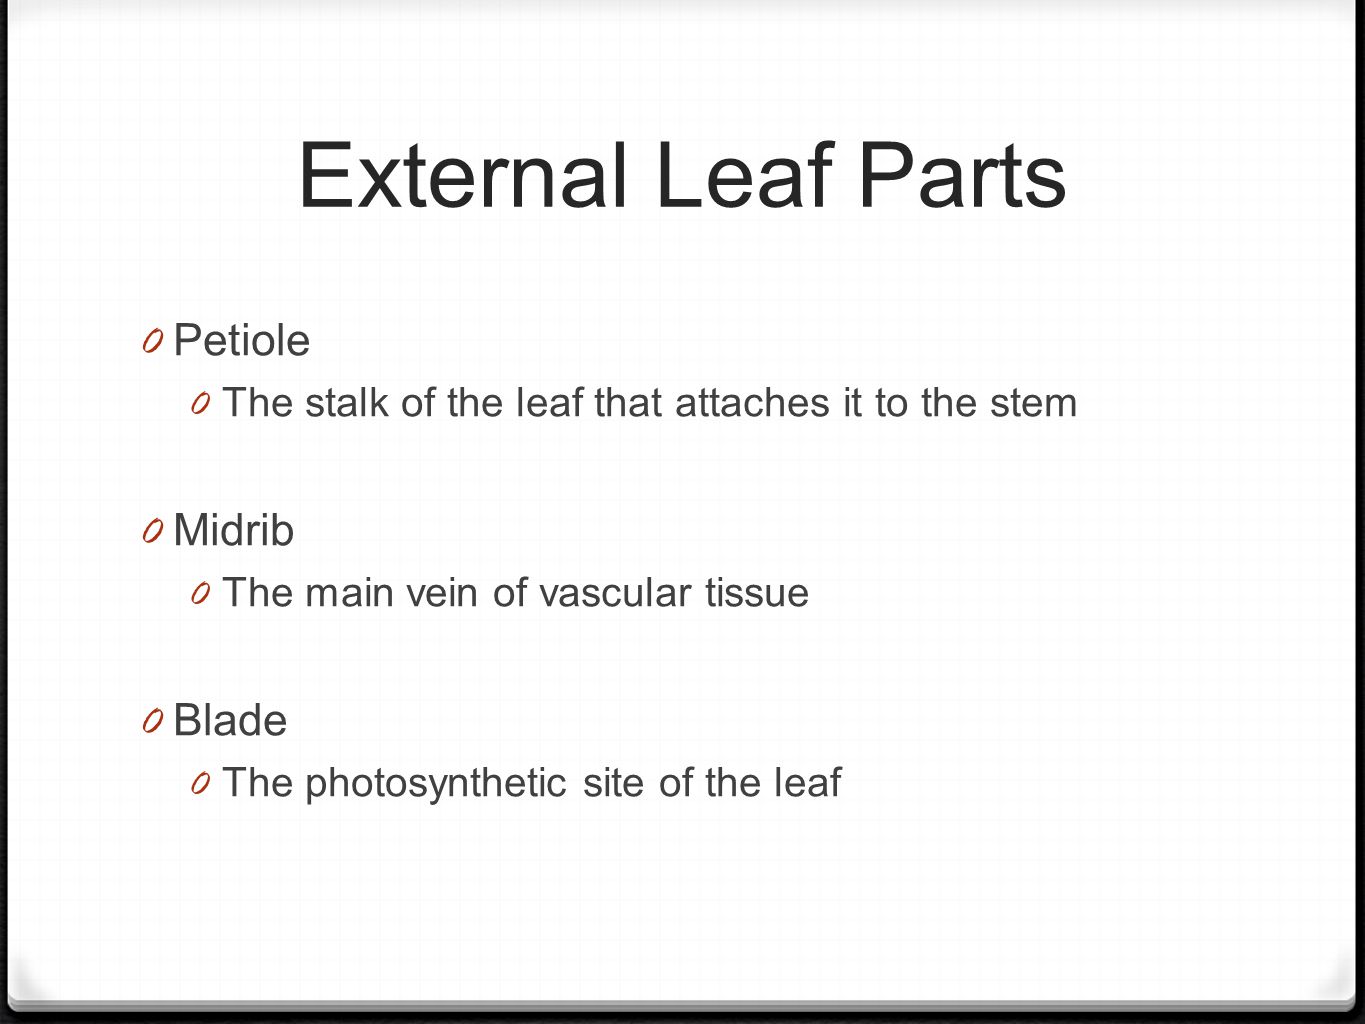 External Leaf Parts 0 Petiole 0 The stalk of the leaf that attaches it to the stem 0 Midrib 0 The main vein of vascular tissue 0 Blade 0 The photosynthetic site of the leaf